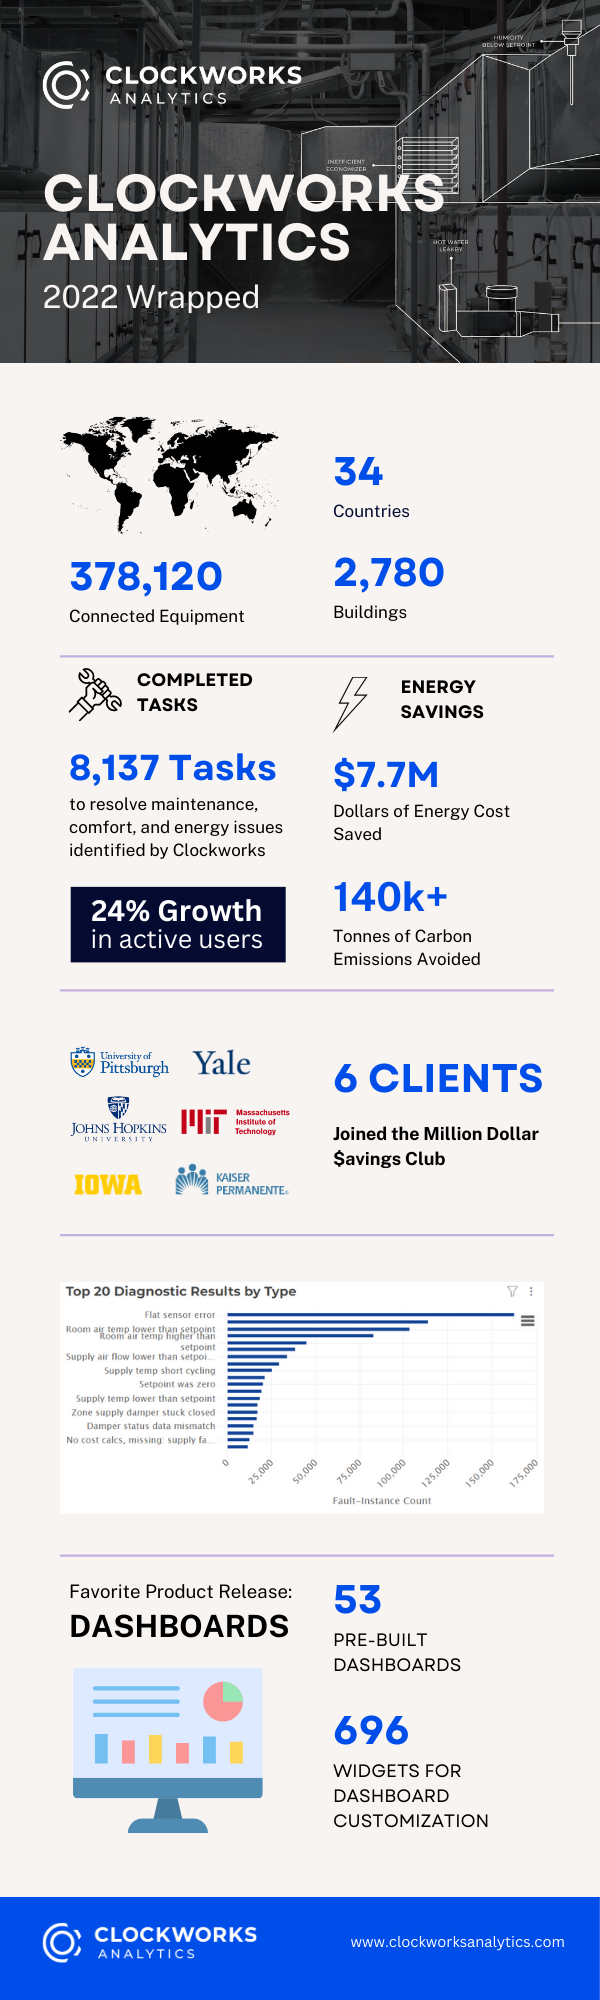 Clockworks 2022 Wrapped - Infographic